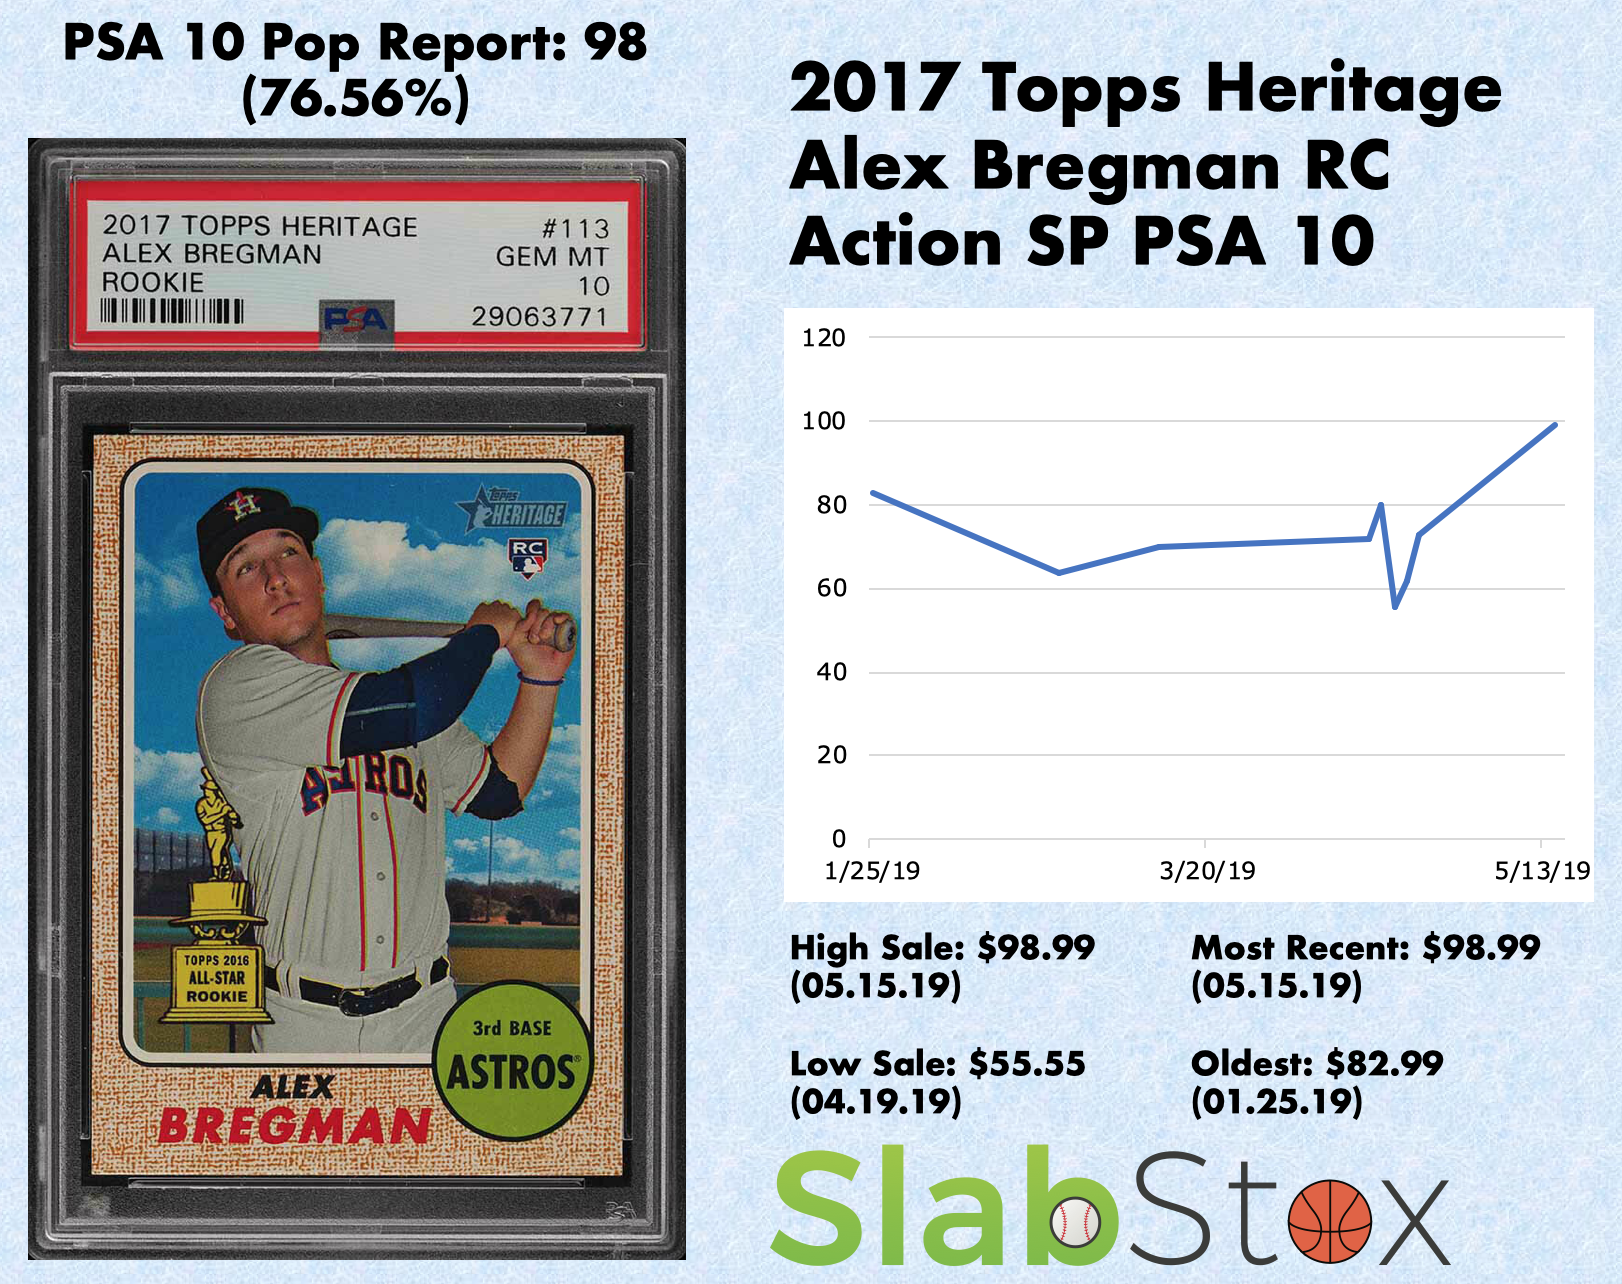 SlabStox infographic for 2017 Topps Heritage Alex Bregman RC ACtion SP PSA 10 sports trading card